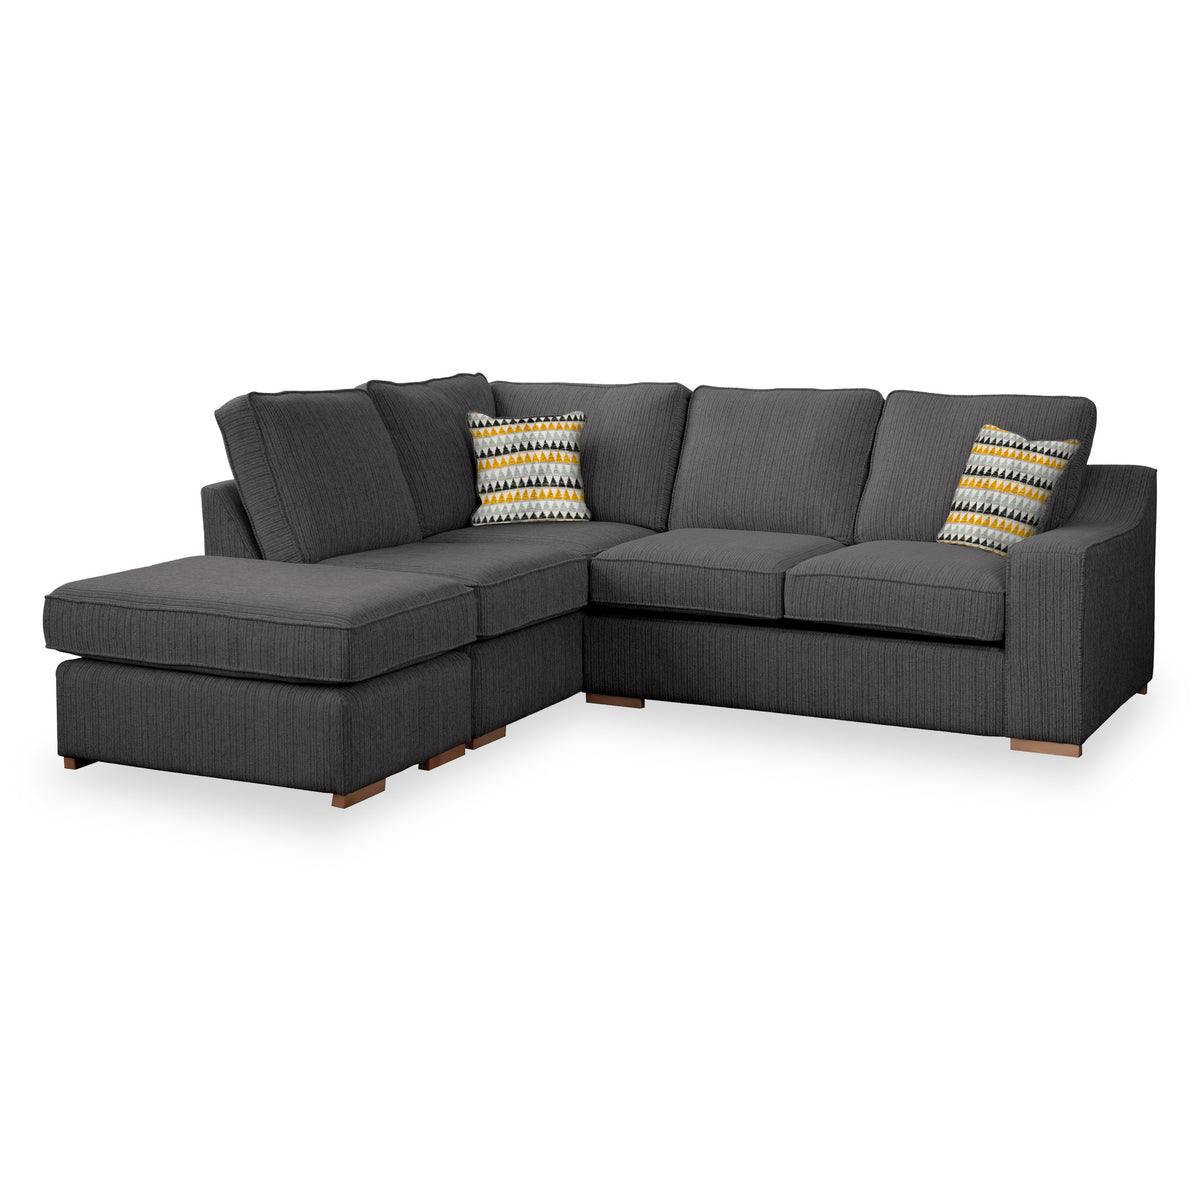 Ashow Charcoal Left Hand Corner Sofabed with Maika Mustard Scatter Cushions from Roseland furniture